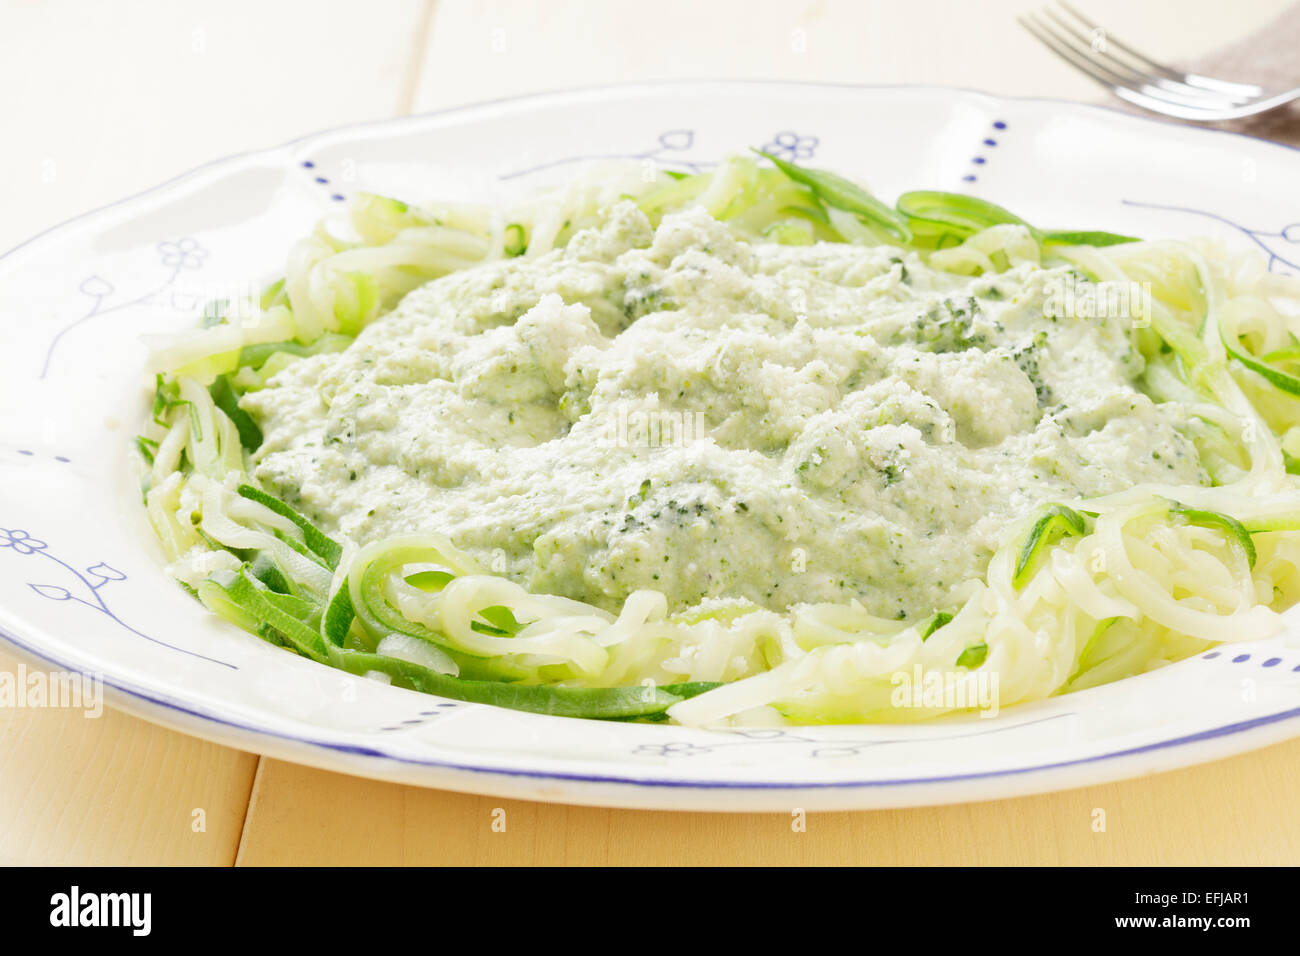 Courgetti or zoodles with a broccoli sauce Stock Photo